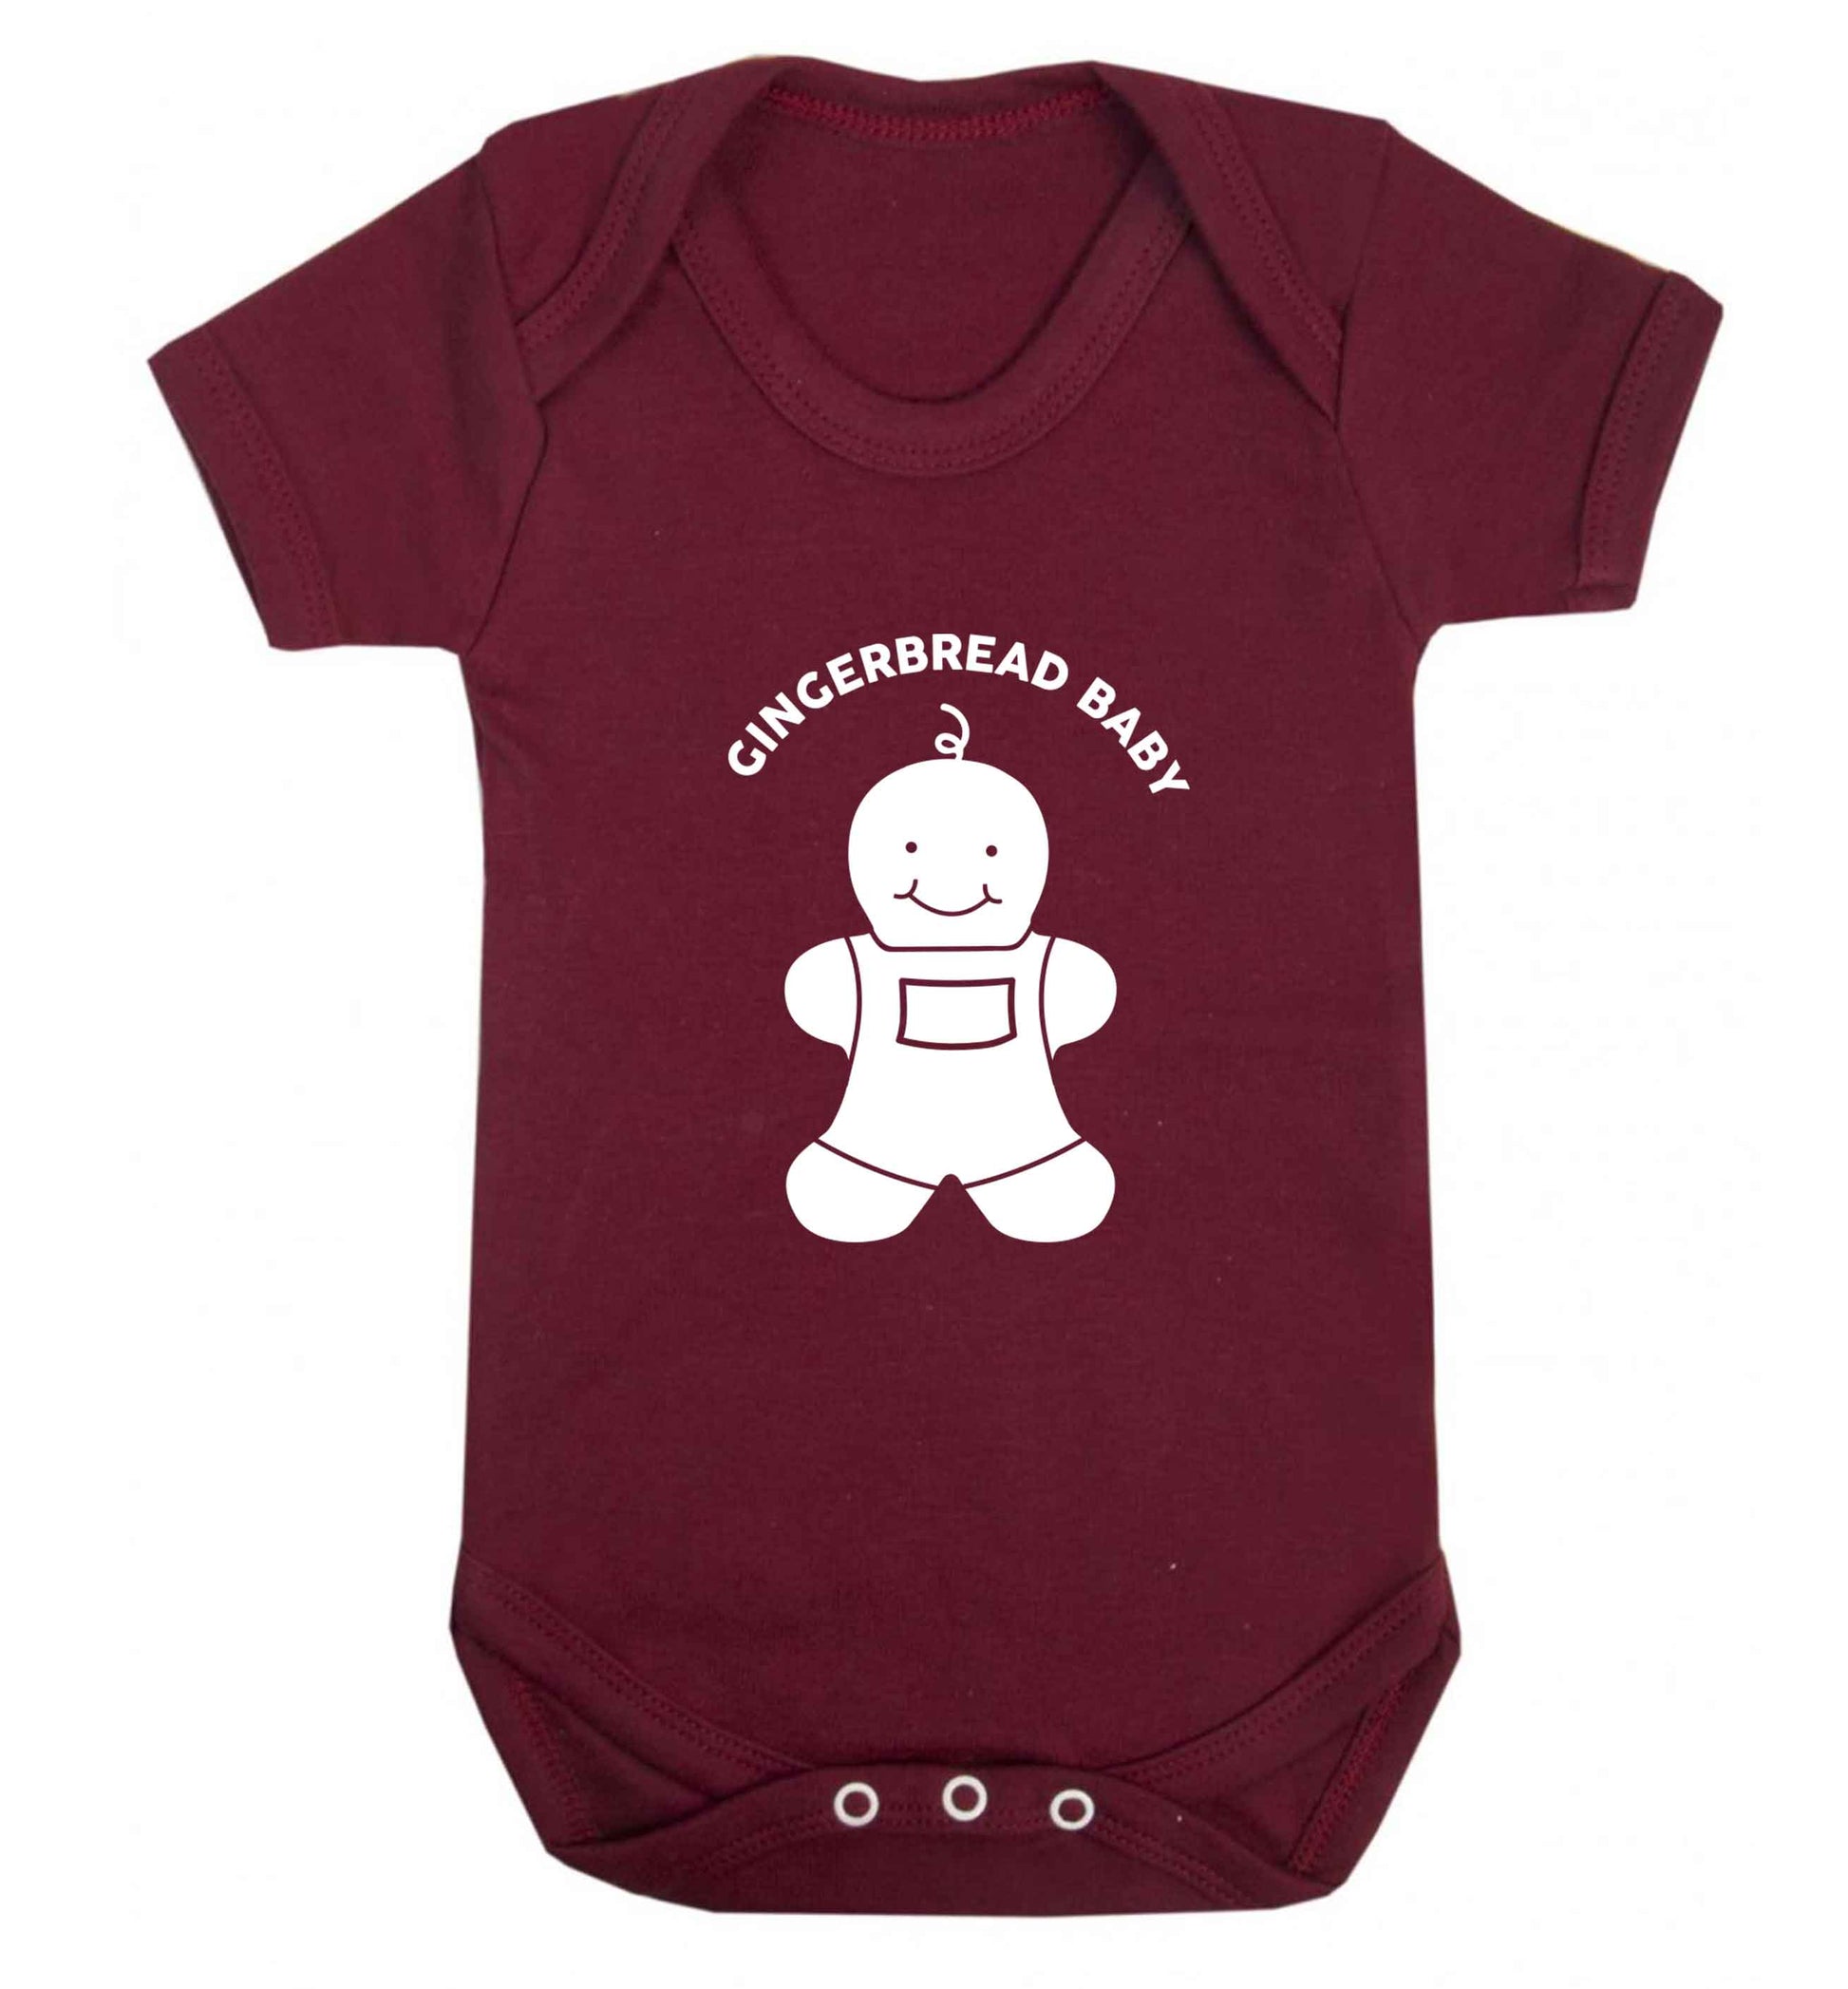 Gingerbread baby baby vest maroon 18-24 months